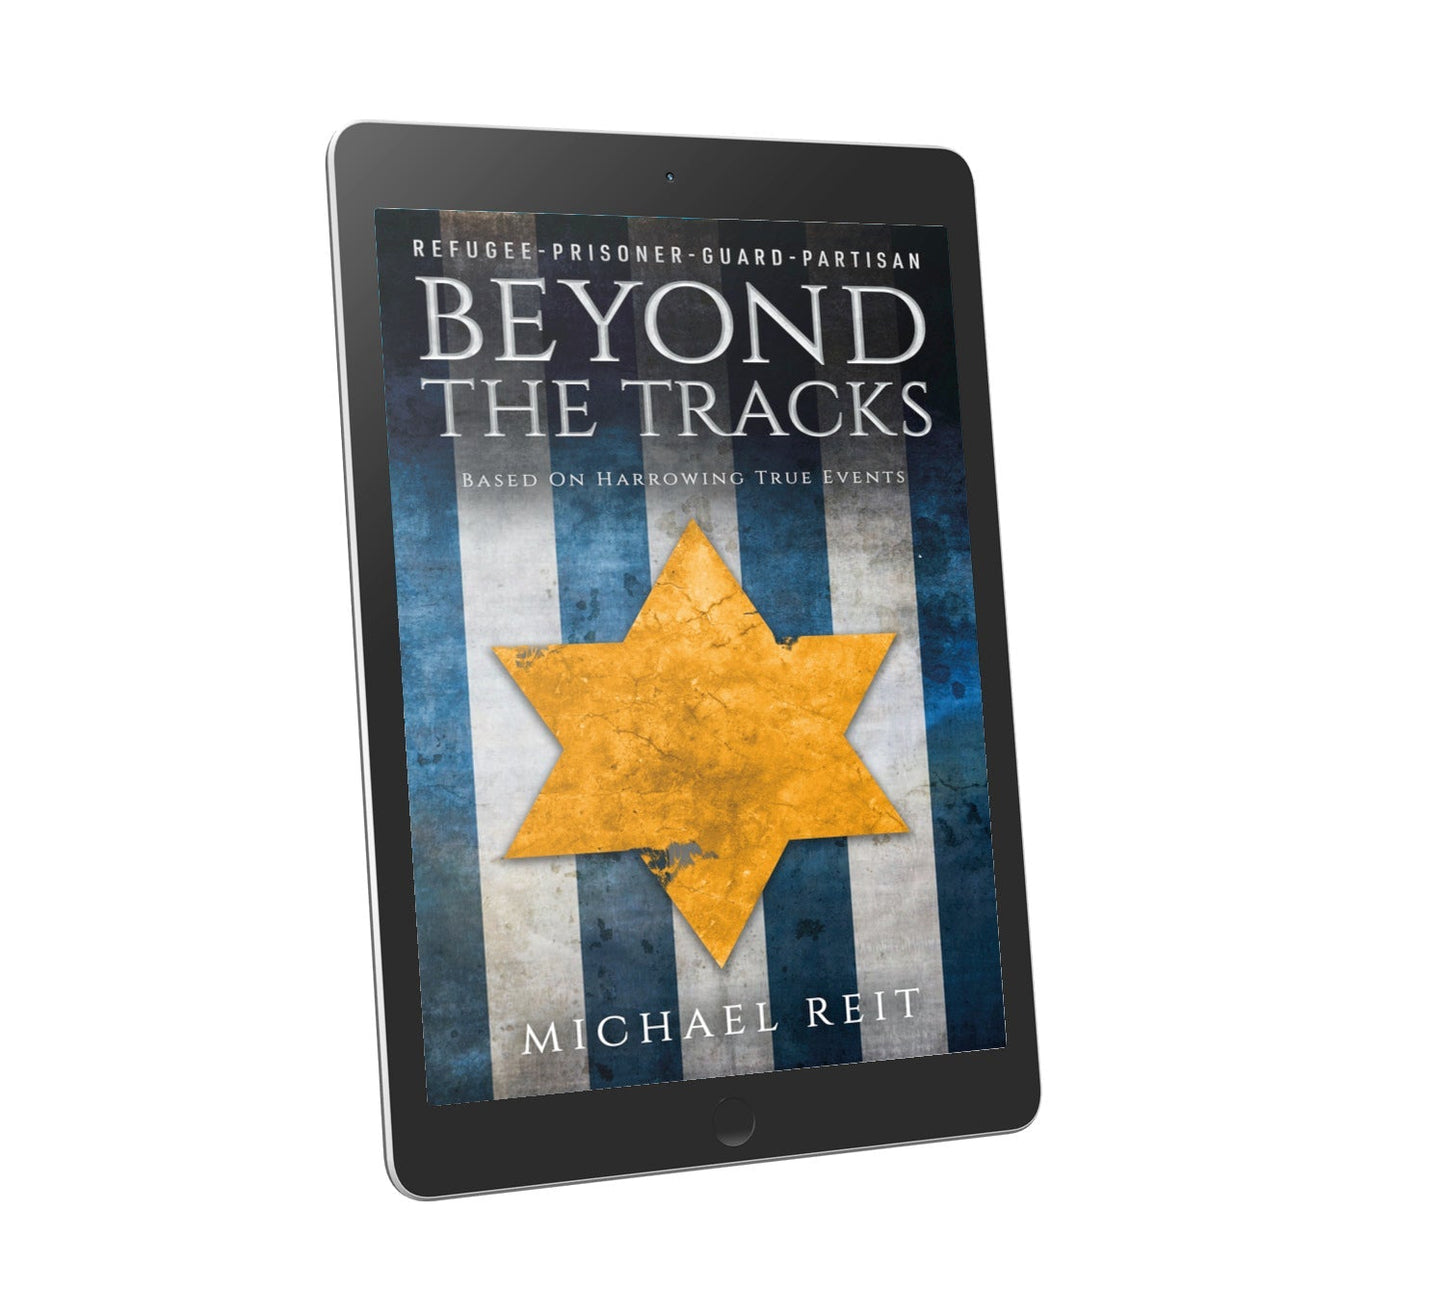 Beyond the Tracks, Ebook - Special CA Deal